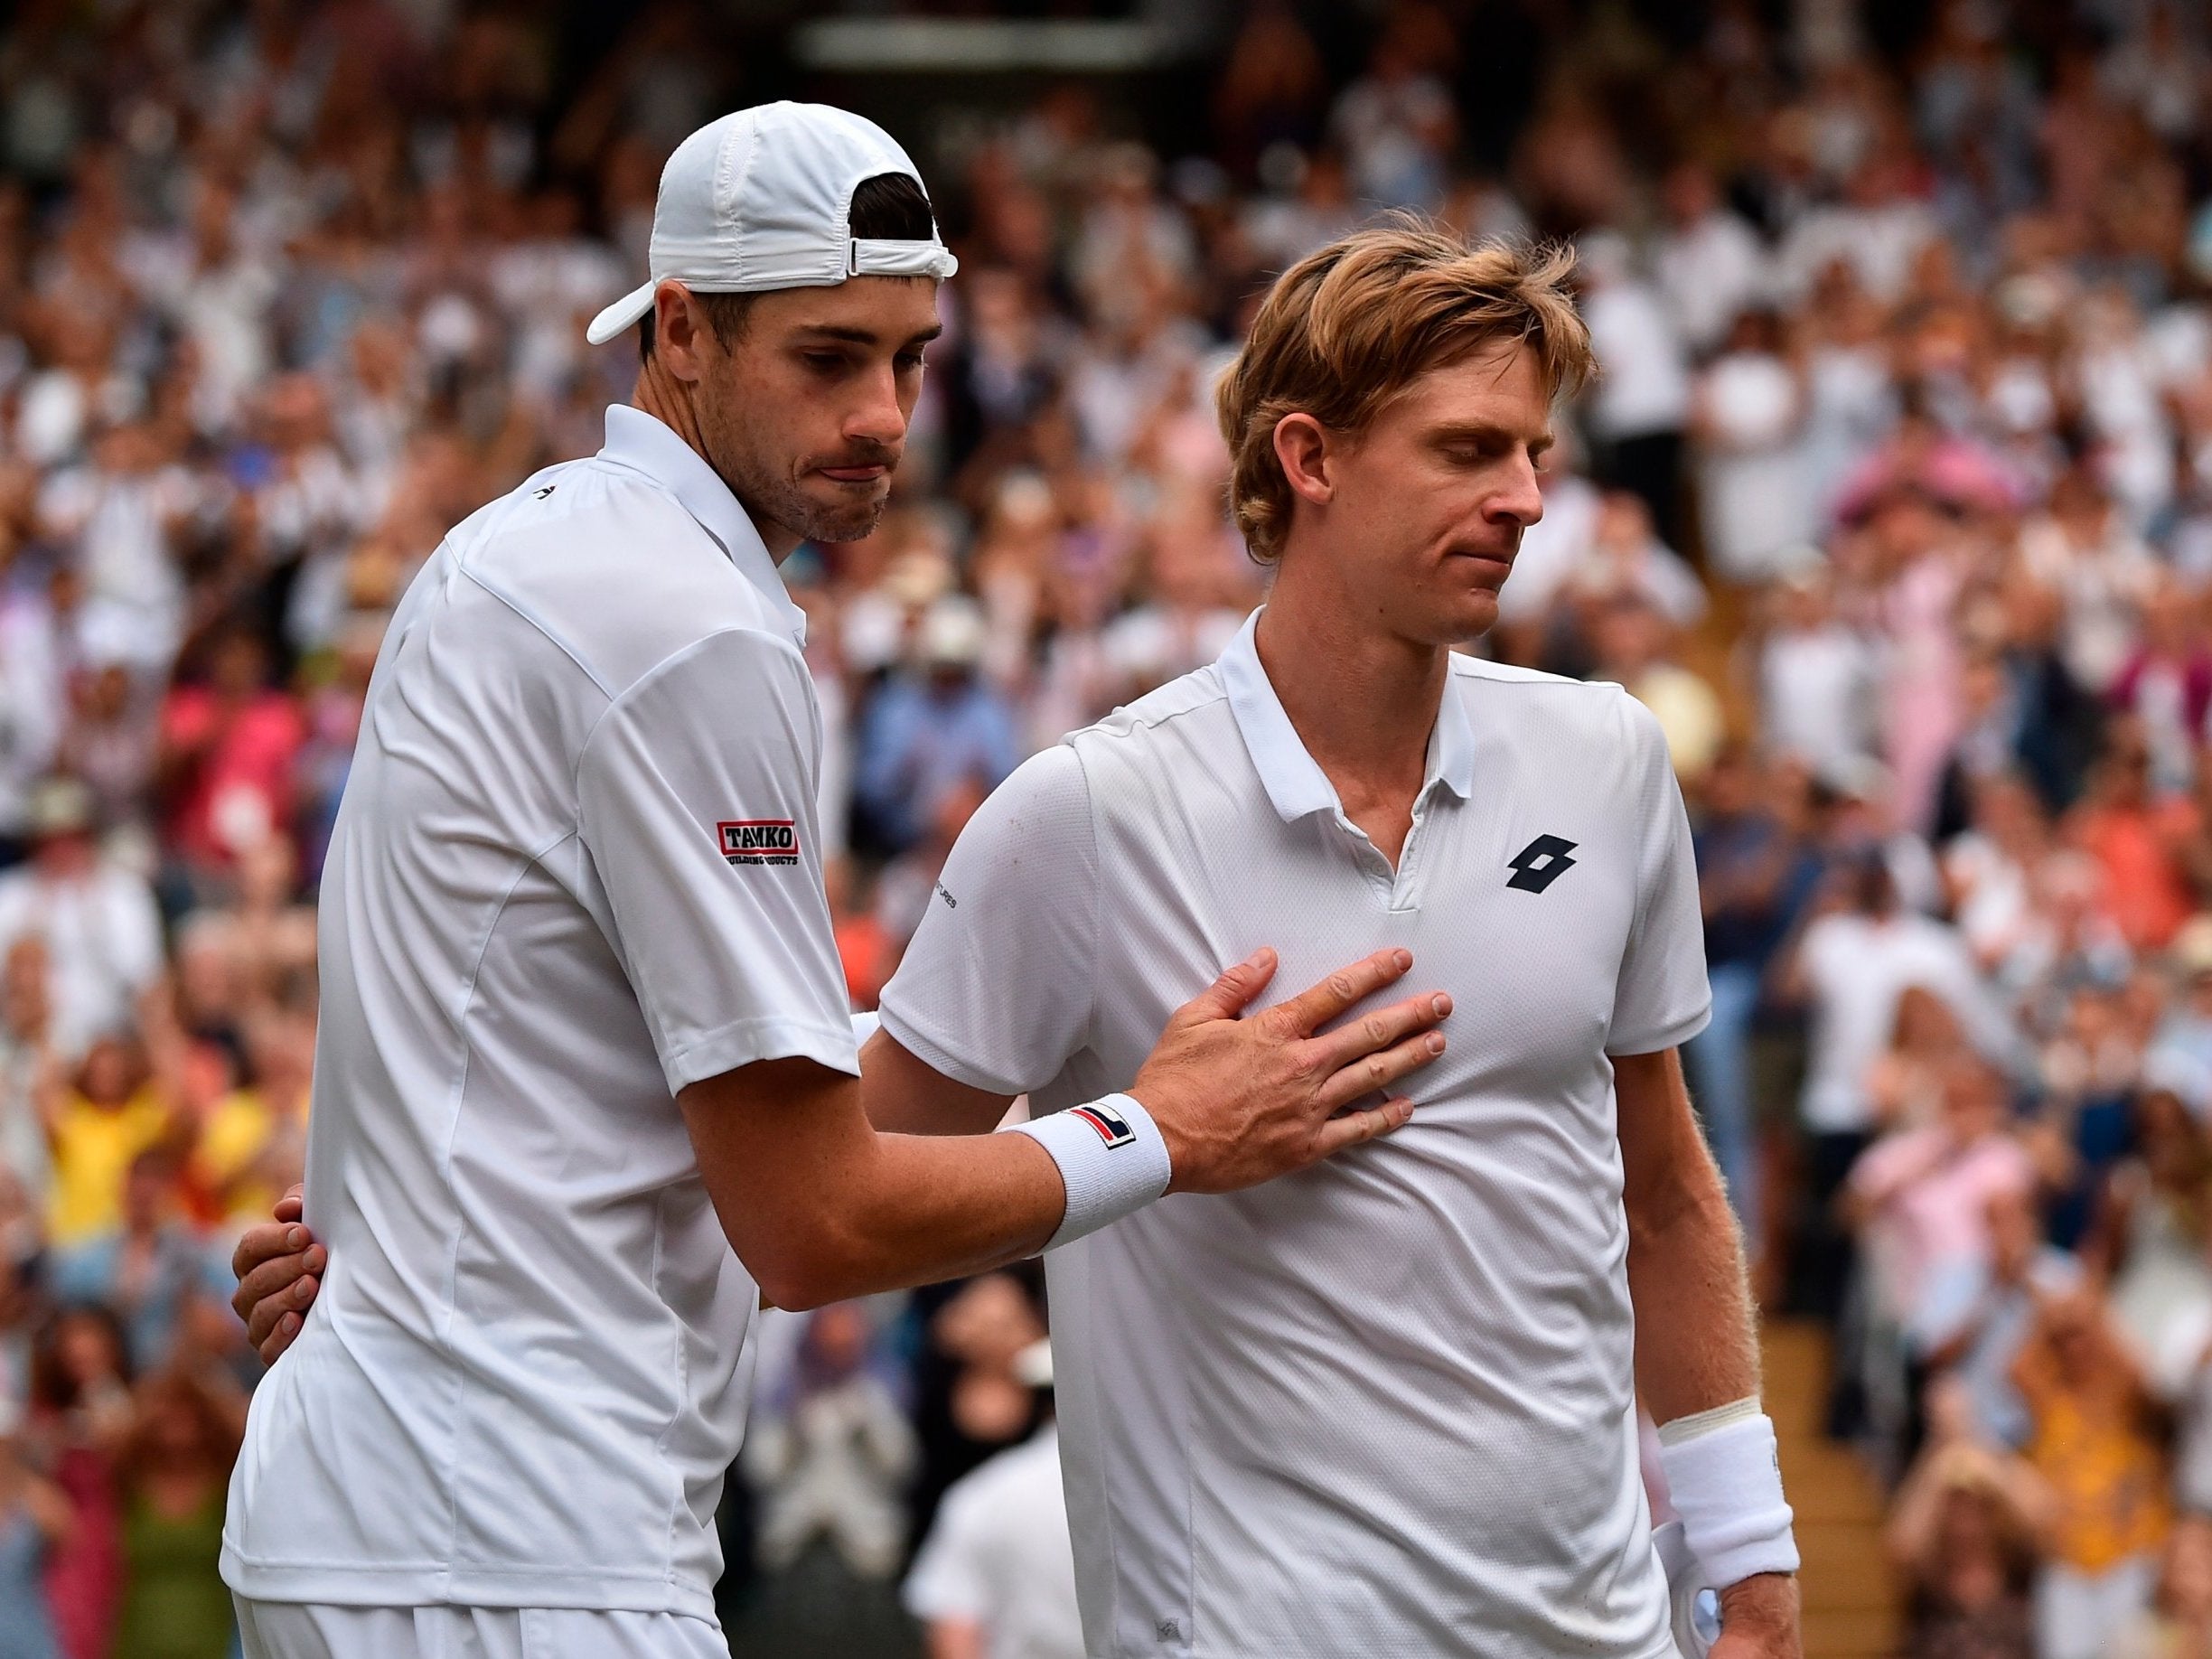 Calls for tiebreaks to end absurd fifth-set contests grow louder